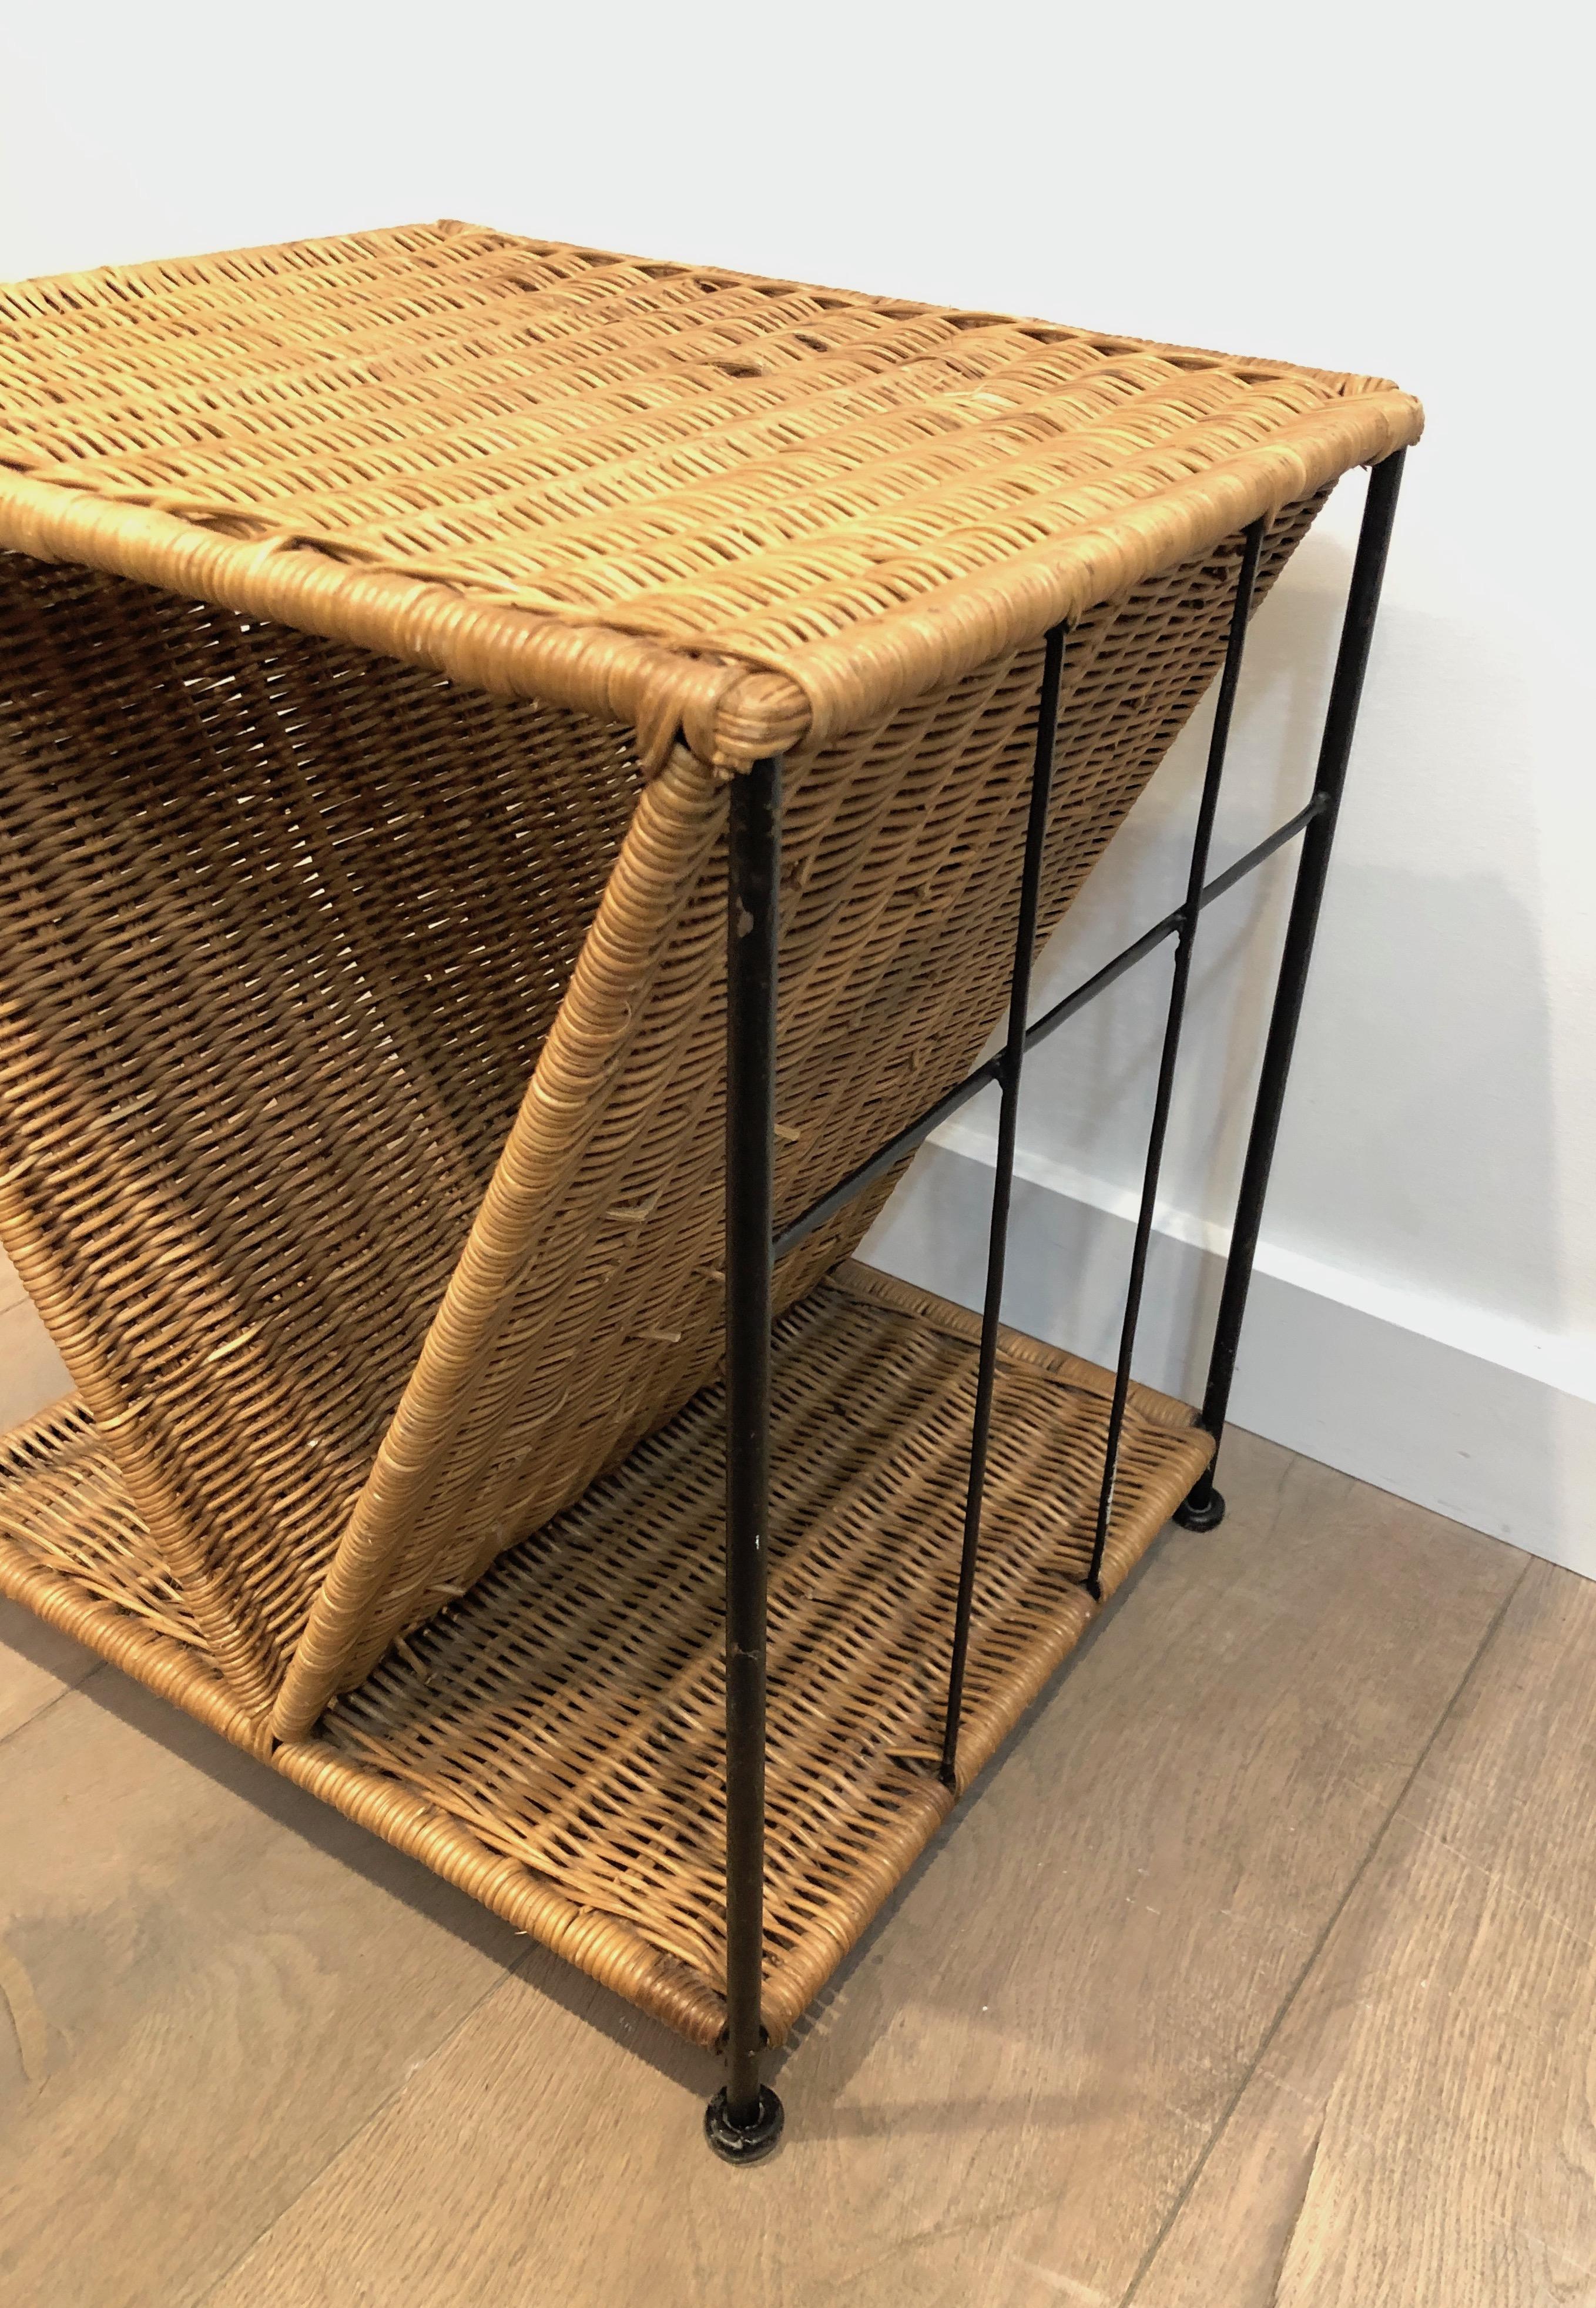 Late 20th Century Rattan and Black Lacquered Metal Side Table, French, Circa 1970